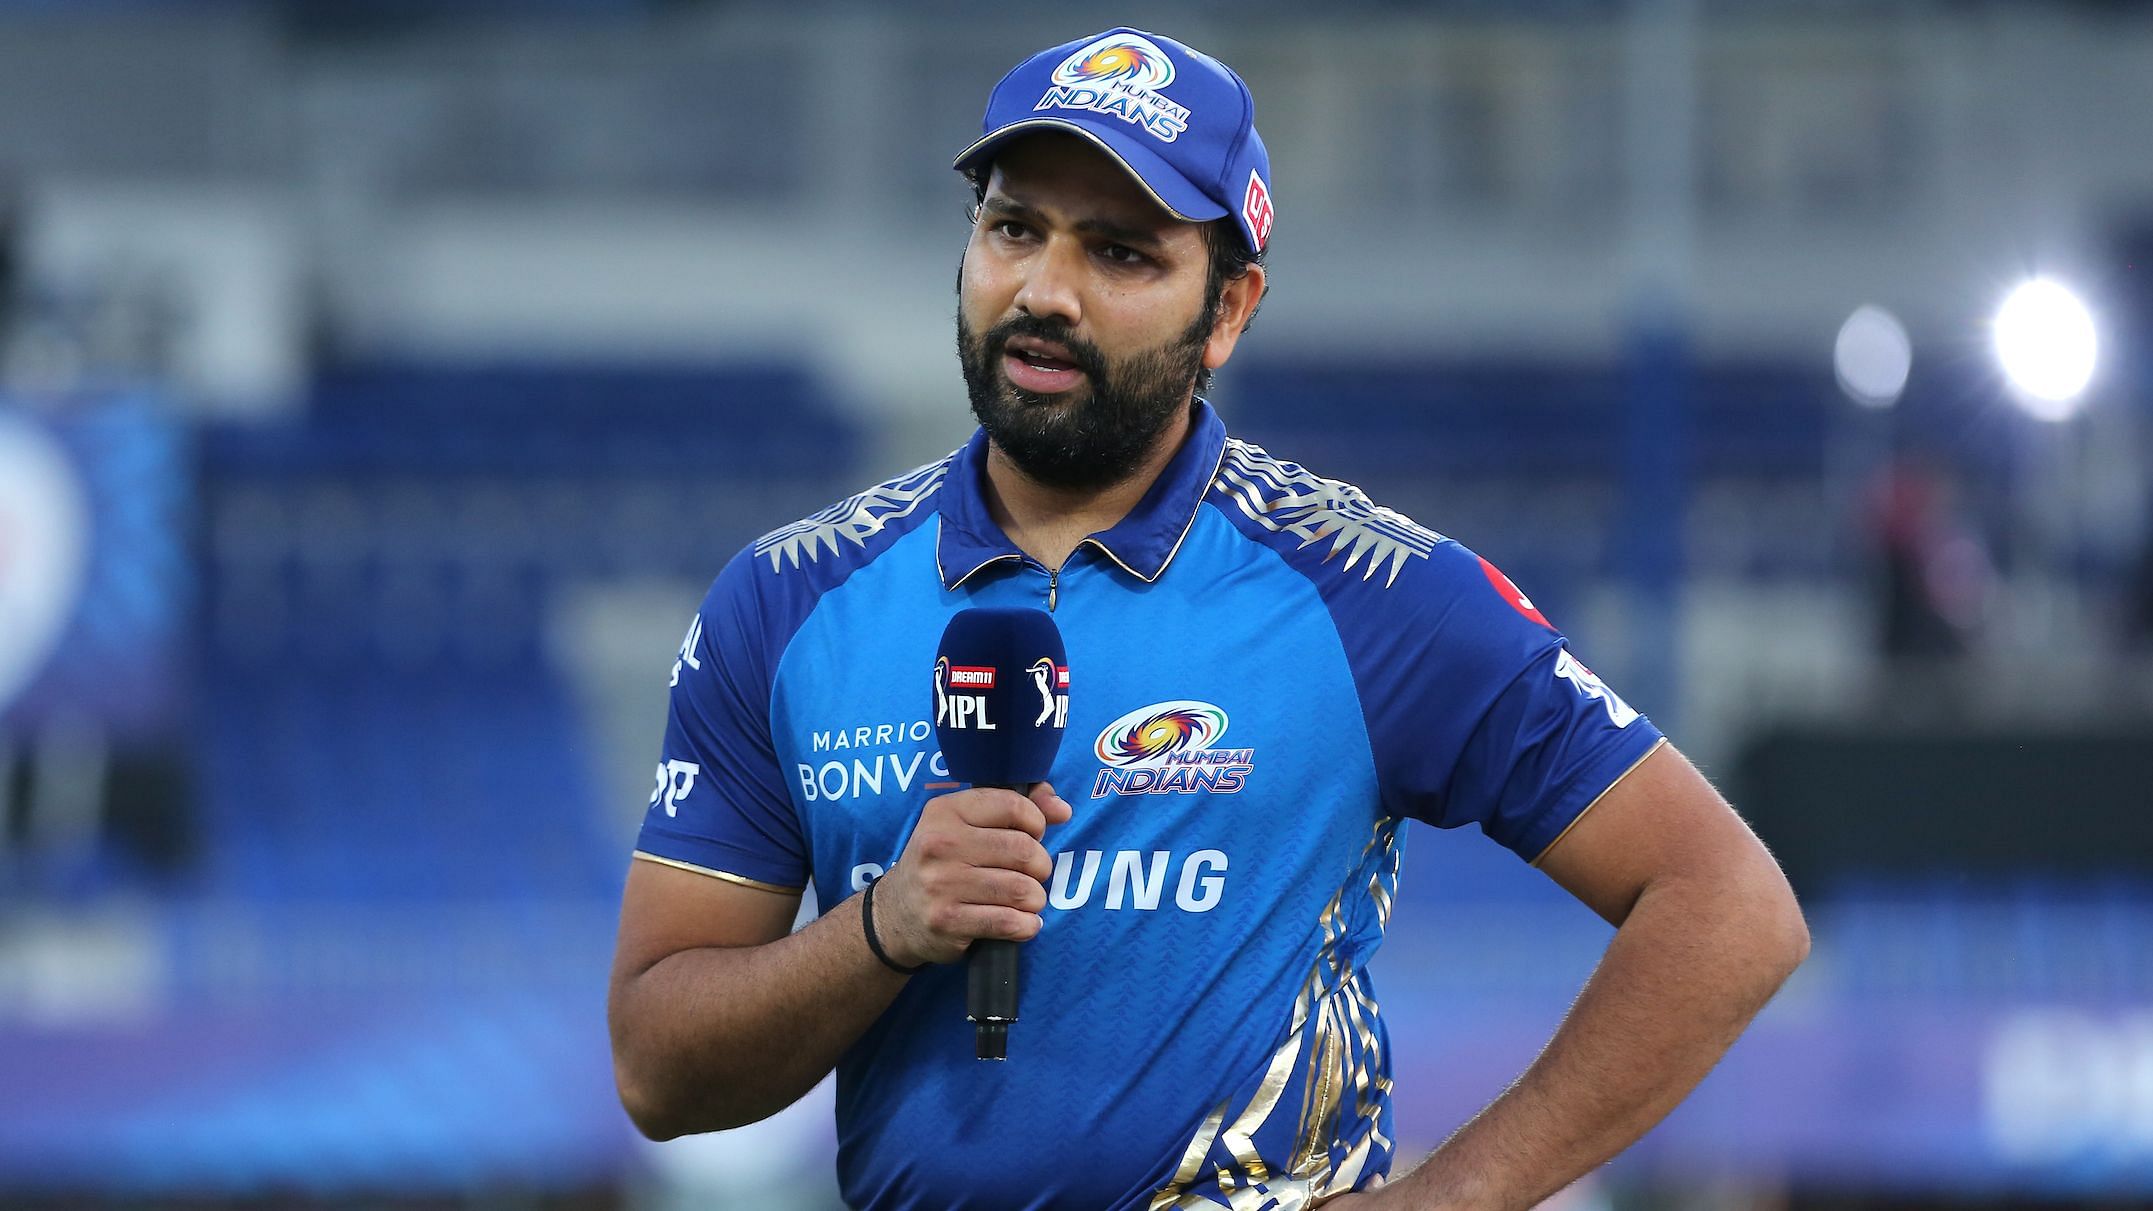 michael vaughan questions bcci for rohit missing in indian team